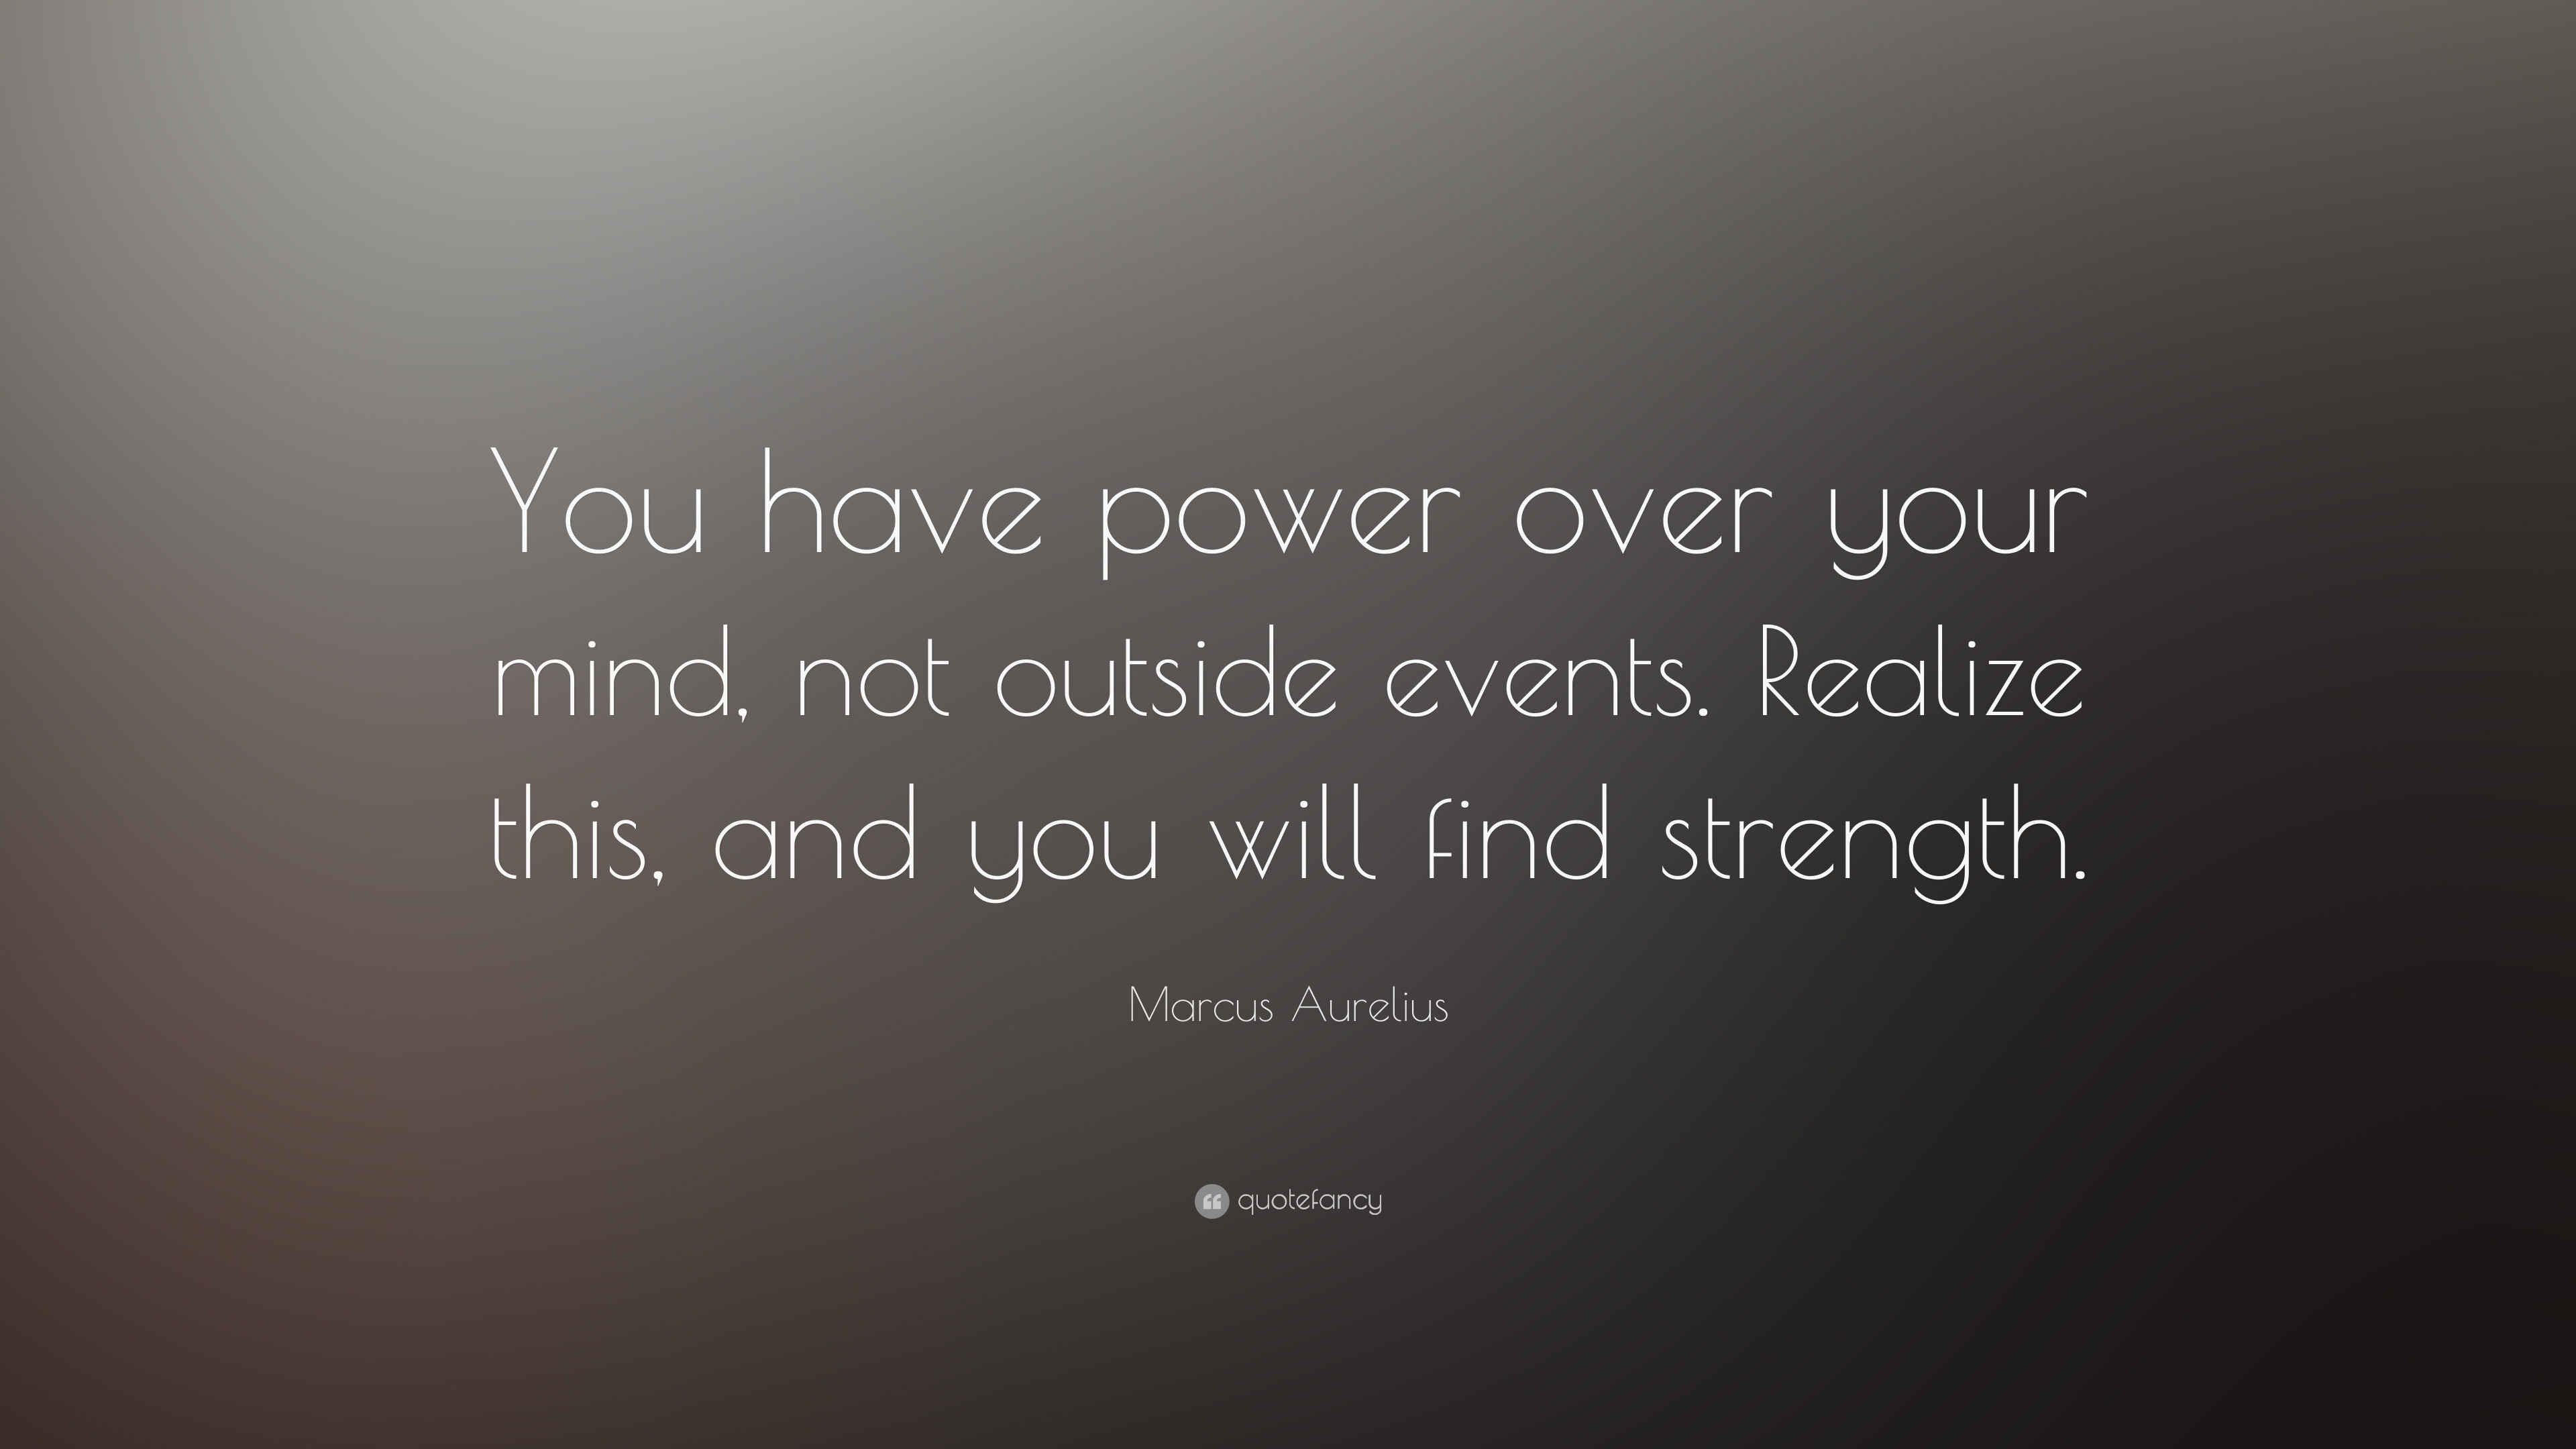 8738-Marcus-Aurelius-Quote-You-have-power-over-your-mind-not-outside.jpg